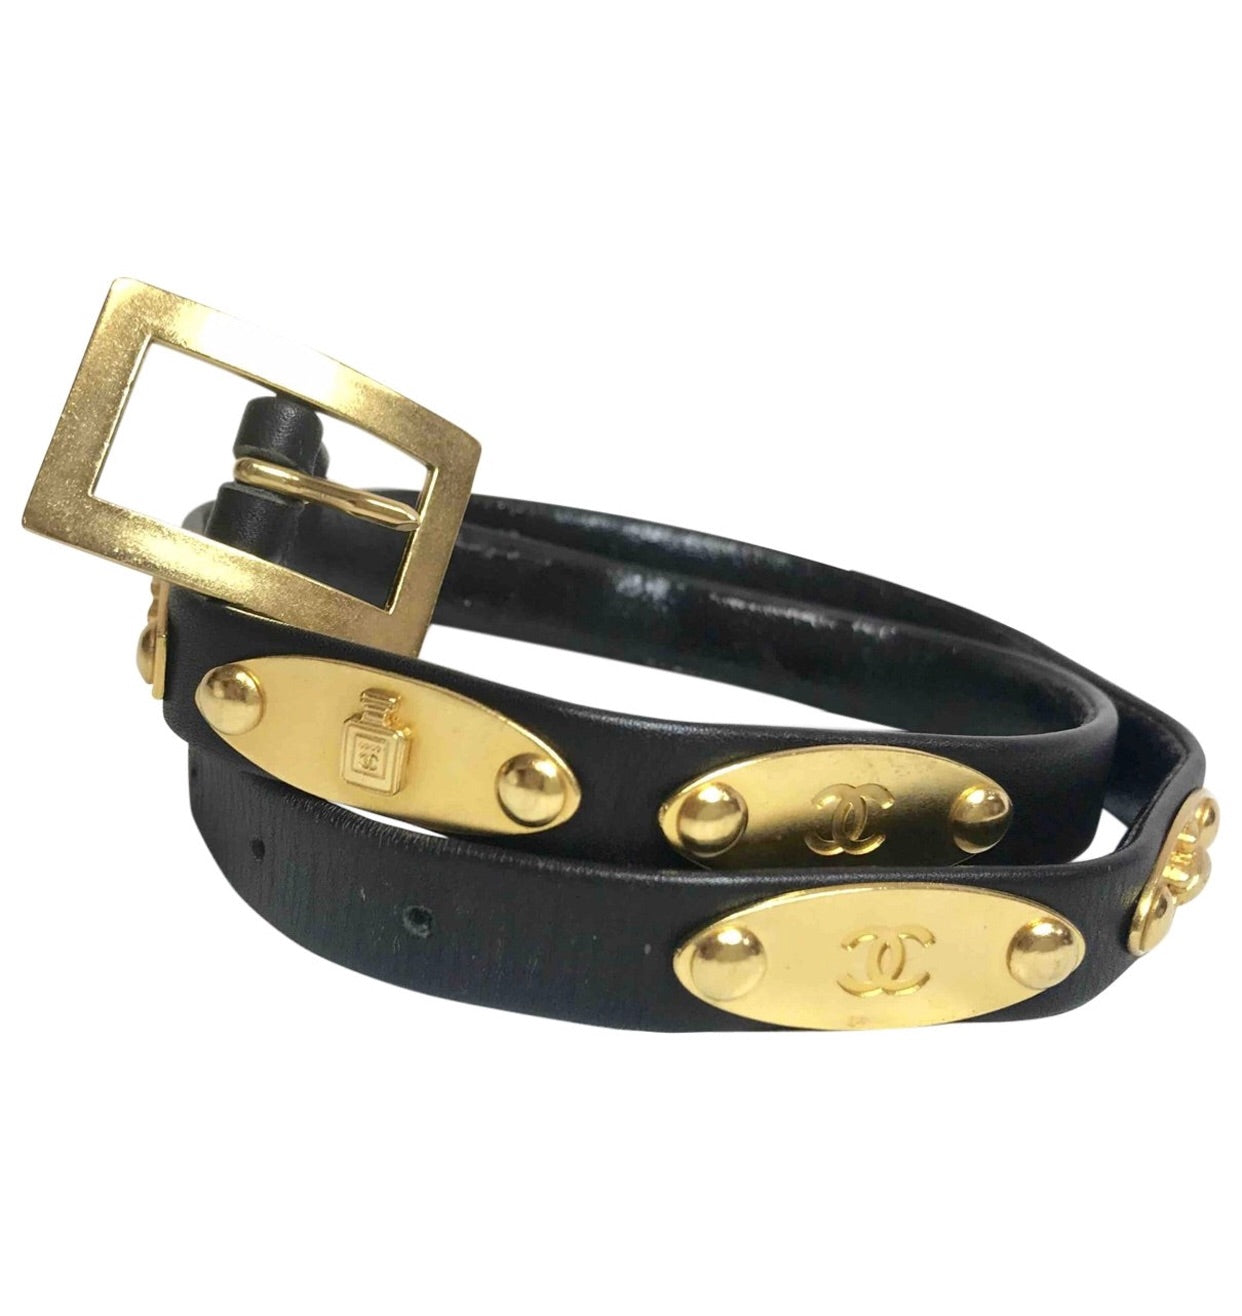 Vintage CHANEL black belt with golden buckle and iconic logo